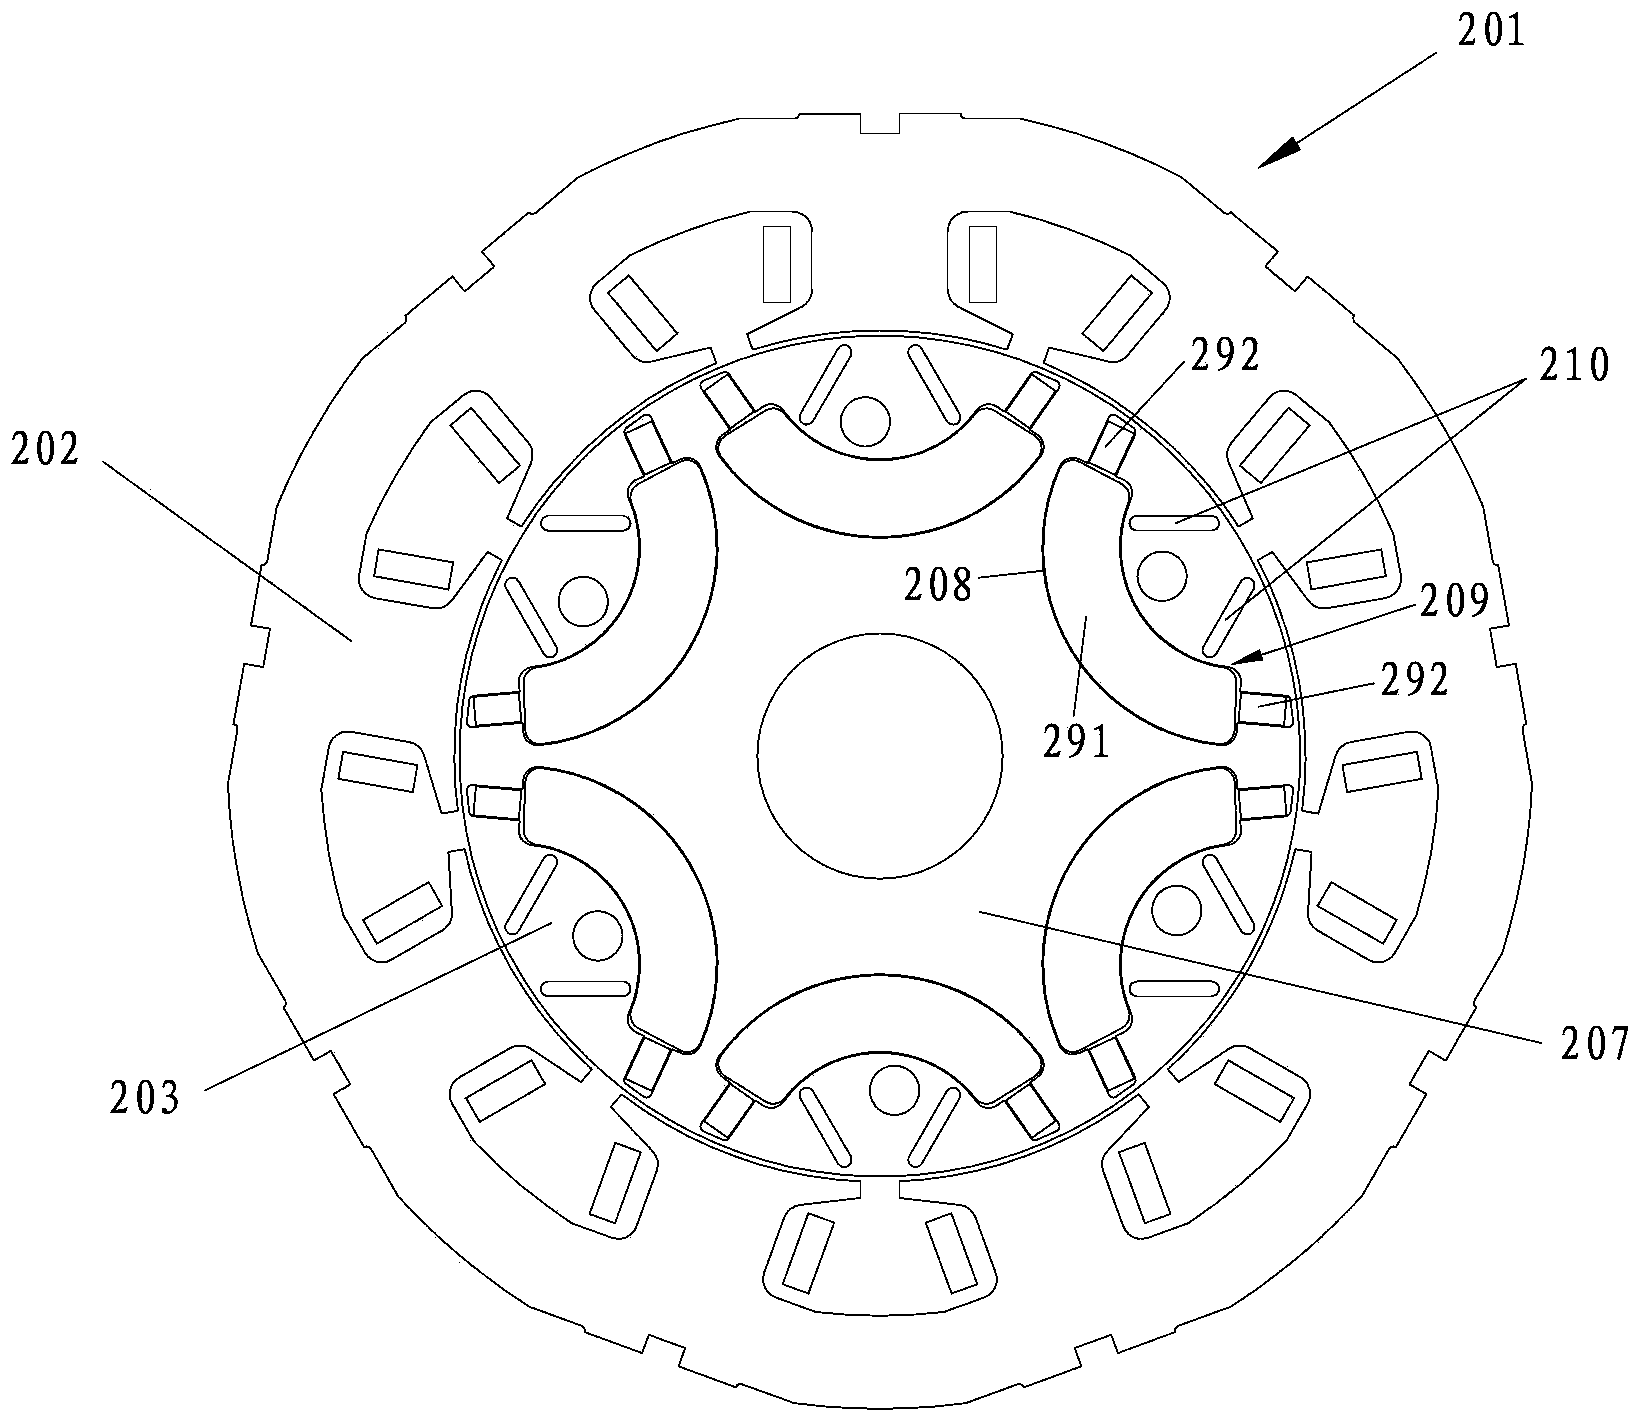 Hybrid permanent magnet rotor assembly and corresponding motor